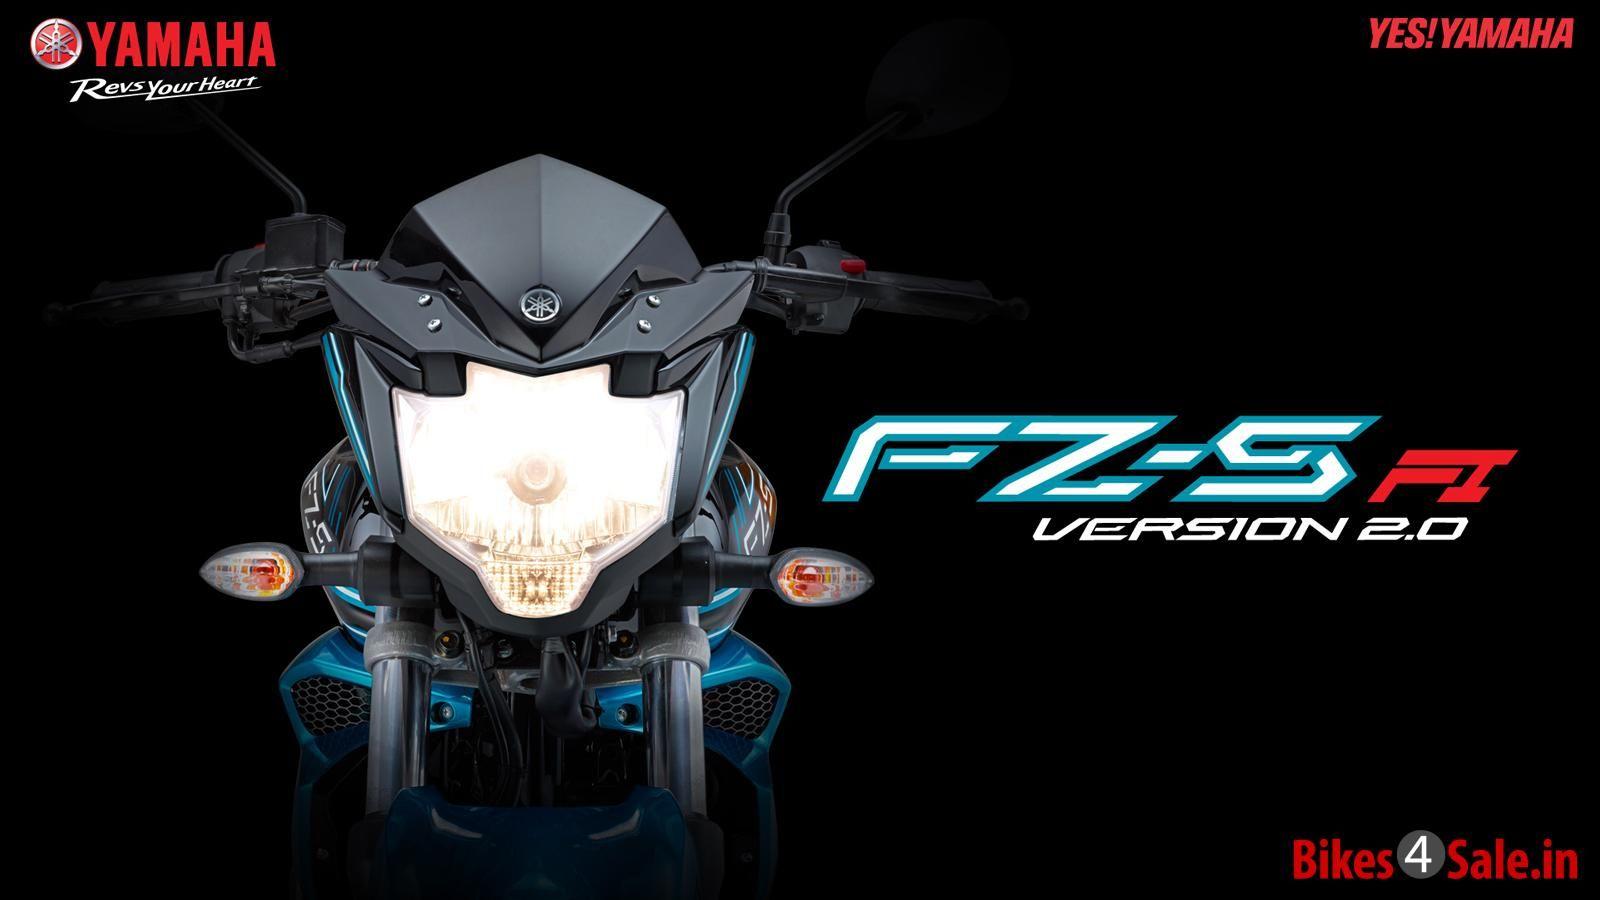 Yamaha FZ S FI V2 Motorcycle Picture Gallery